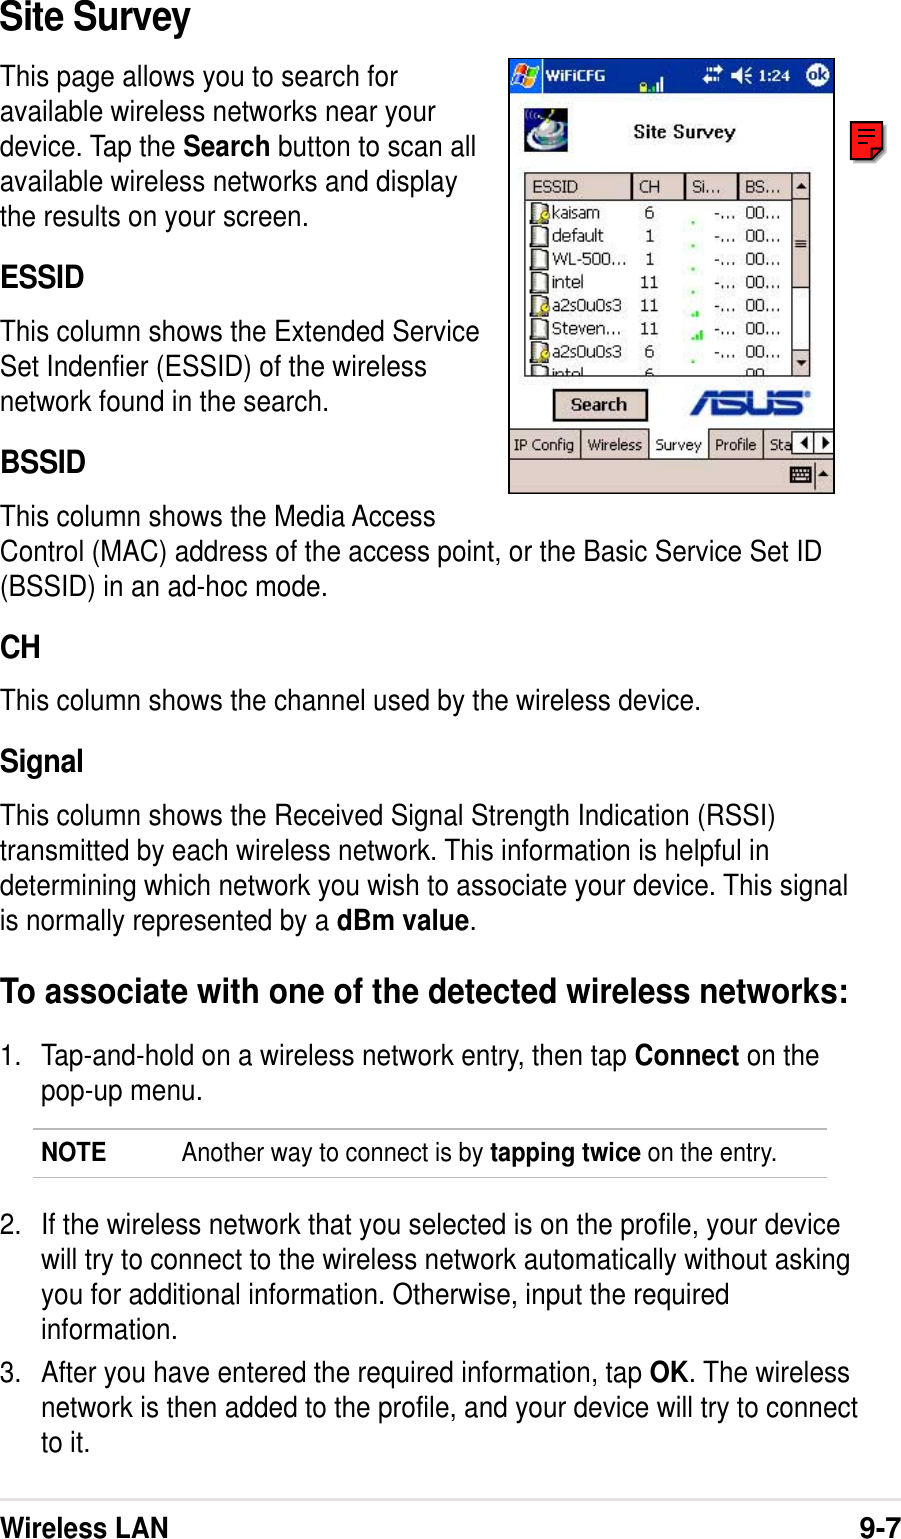 Wireless LAN9-7Site SurveyThis page allows you to search foravailable wireless networks near yourdevice. Tap the Search button to scan allavailable wireless networks and displaythe results on your screen.ESSIDThis column shows the Extended ServiceSet Indenfier (ESSID) of the wirelessnetwork found in the search.BSSIDThis column shows the Media AccessControl (MAC) address of the access point, or the Basic Service Set ID(BSSID) in an ad-hoc mode.CHThis column shows the channel used by the wireless device.SignalThis column shows the Received Signal Strength Indication (RSSI)transmitted by each wireless network. This information is helpful indetermining which network you wish to associate your device. This signalis normally represented by a dBm value.To associate with one of the detected wireless networks:1. Tap-and-hold on a wireless network entry, then tap Connect on thepop-up menu.NOTE Another way to connect is by tapping twice on the entry.2. If the wireless network that you selected is on the profile, your devicewill try to connect to the wireless network automatically without askingyou for additional information. Otherwise, input the requiredinformation.3. After you have entered the required information, tap OK. The wirelessnetwork is then added to the profile, and your device will try to connectto it.